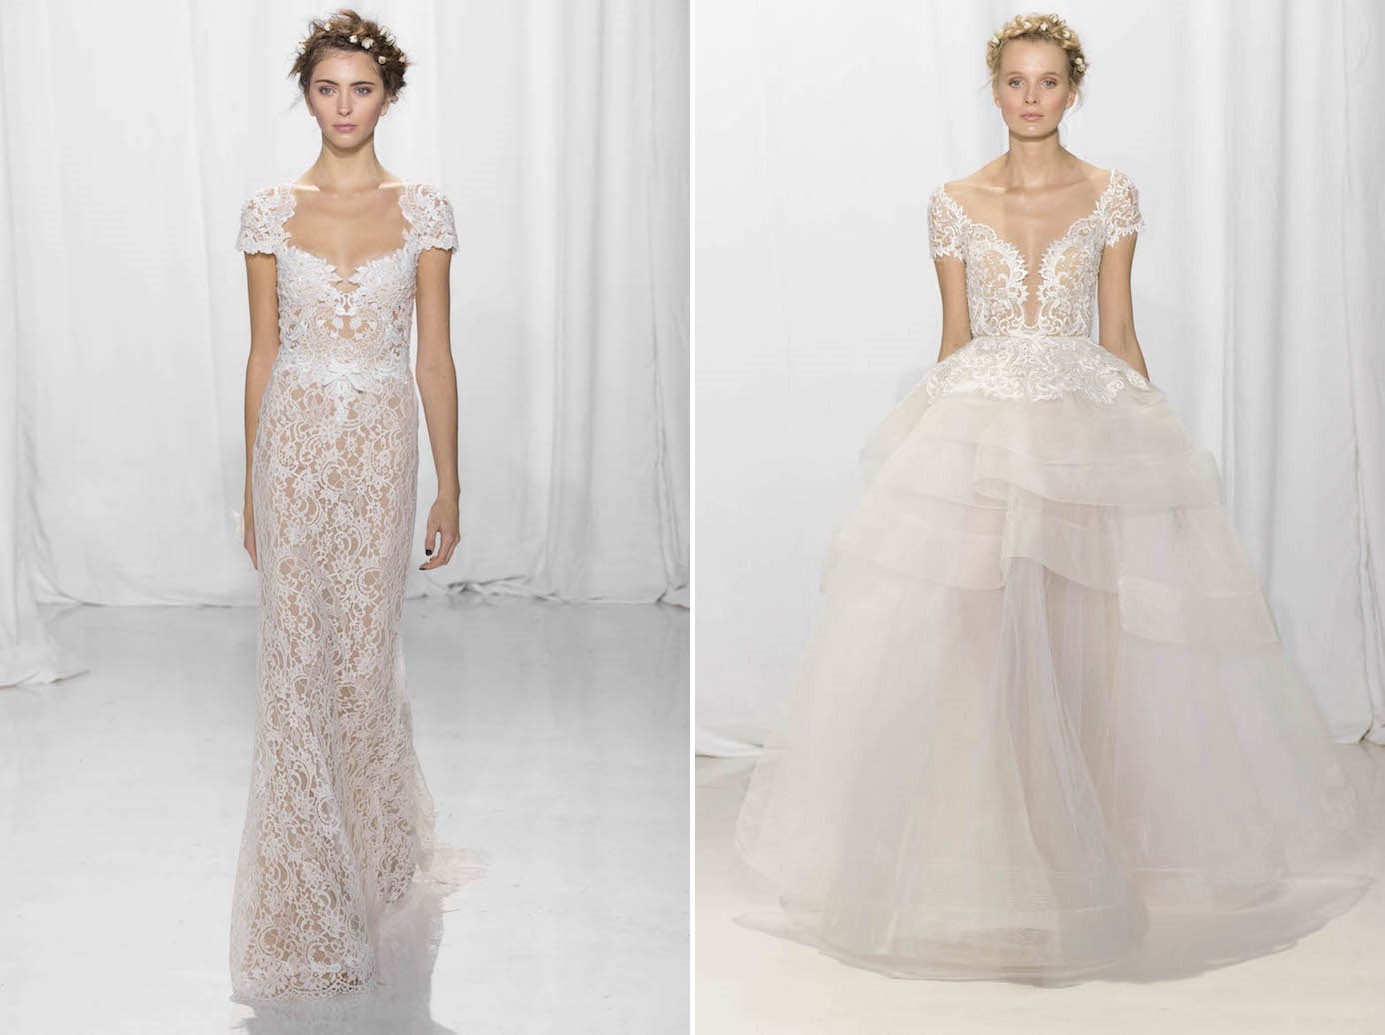 Reem Acra's Ethereal & Elegant 2017 Bridal Collection